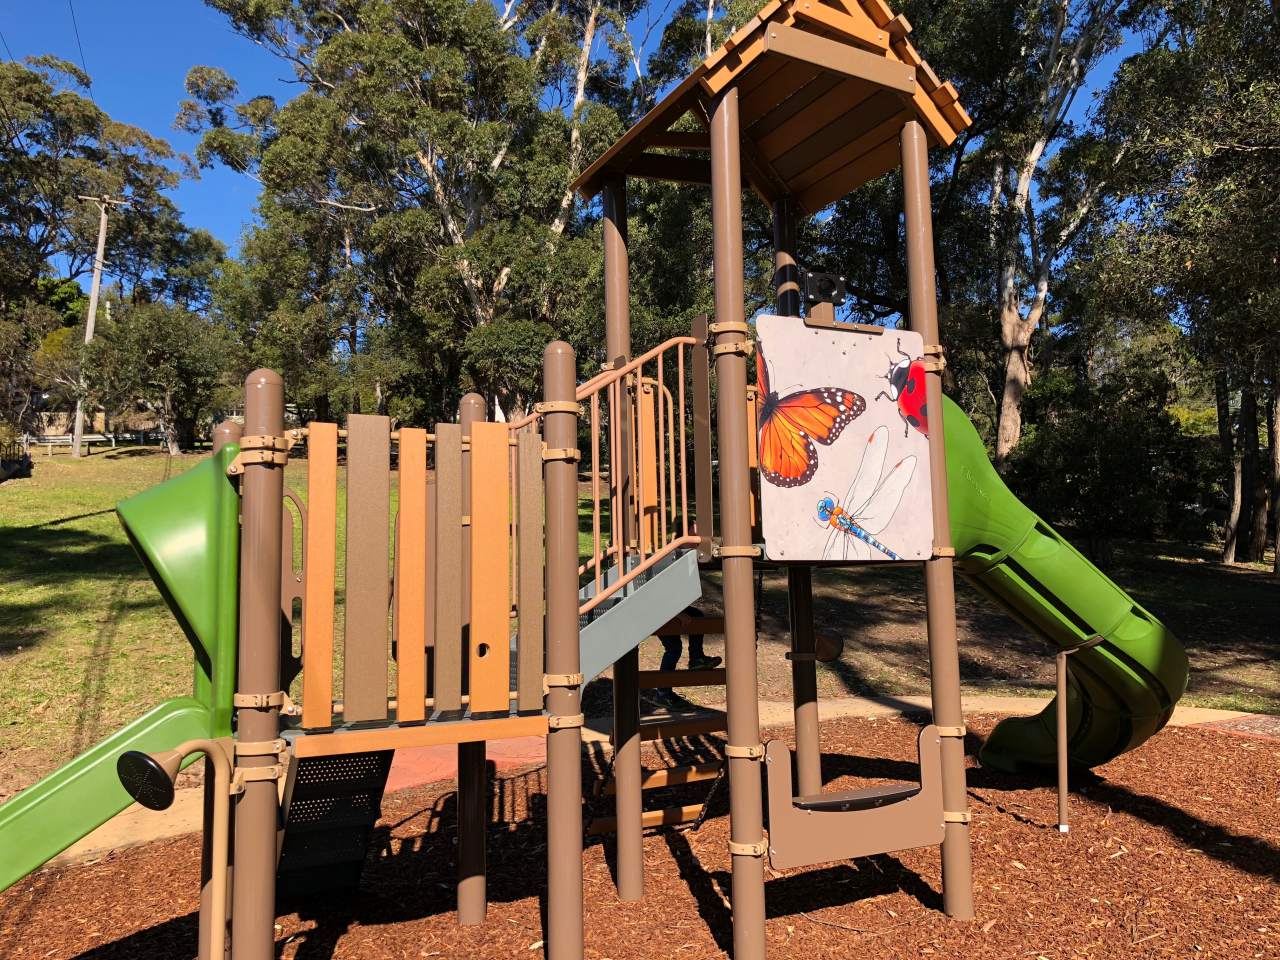 Adventurous Kids Will Love the “Snake” Bike and Scooter Path at Drummer Parry Park in Terrigal